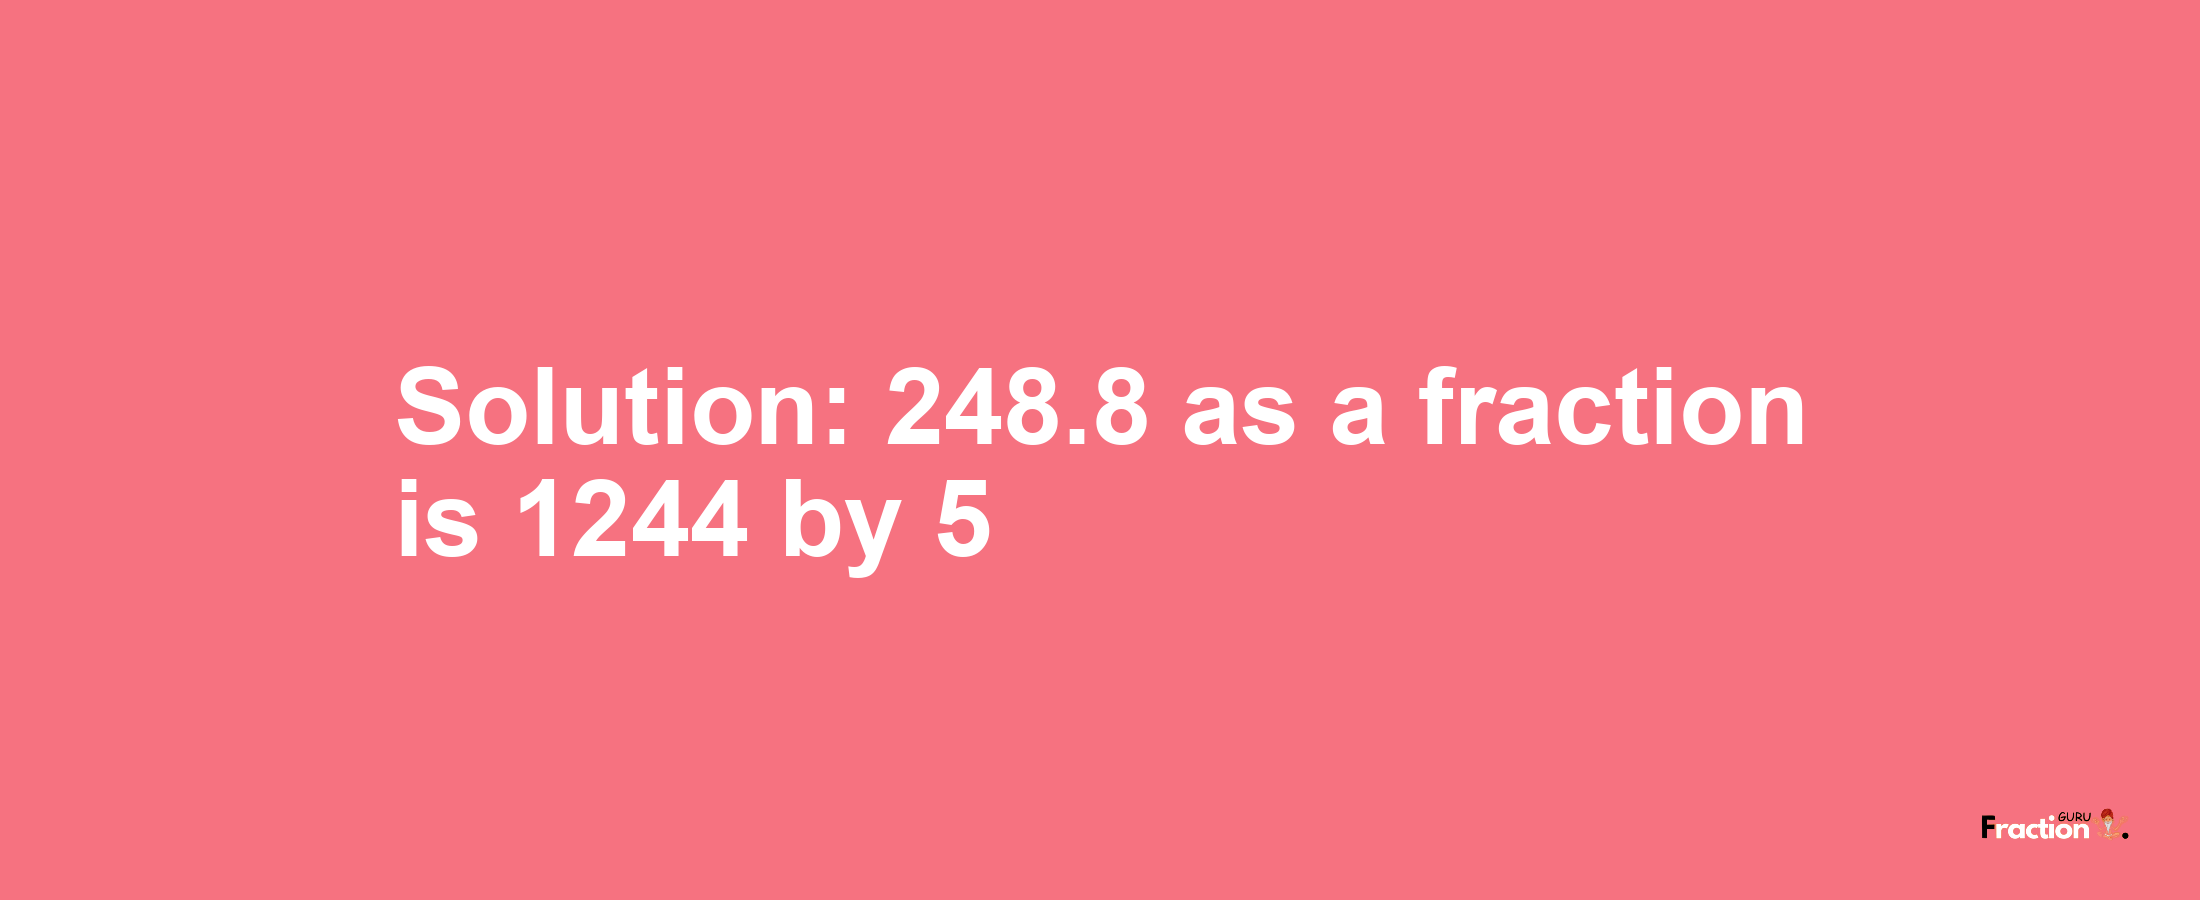 Solution:248.8 as a fraction is 1244/5